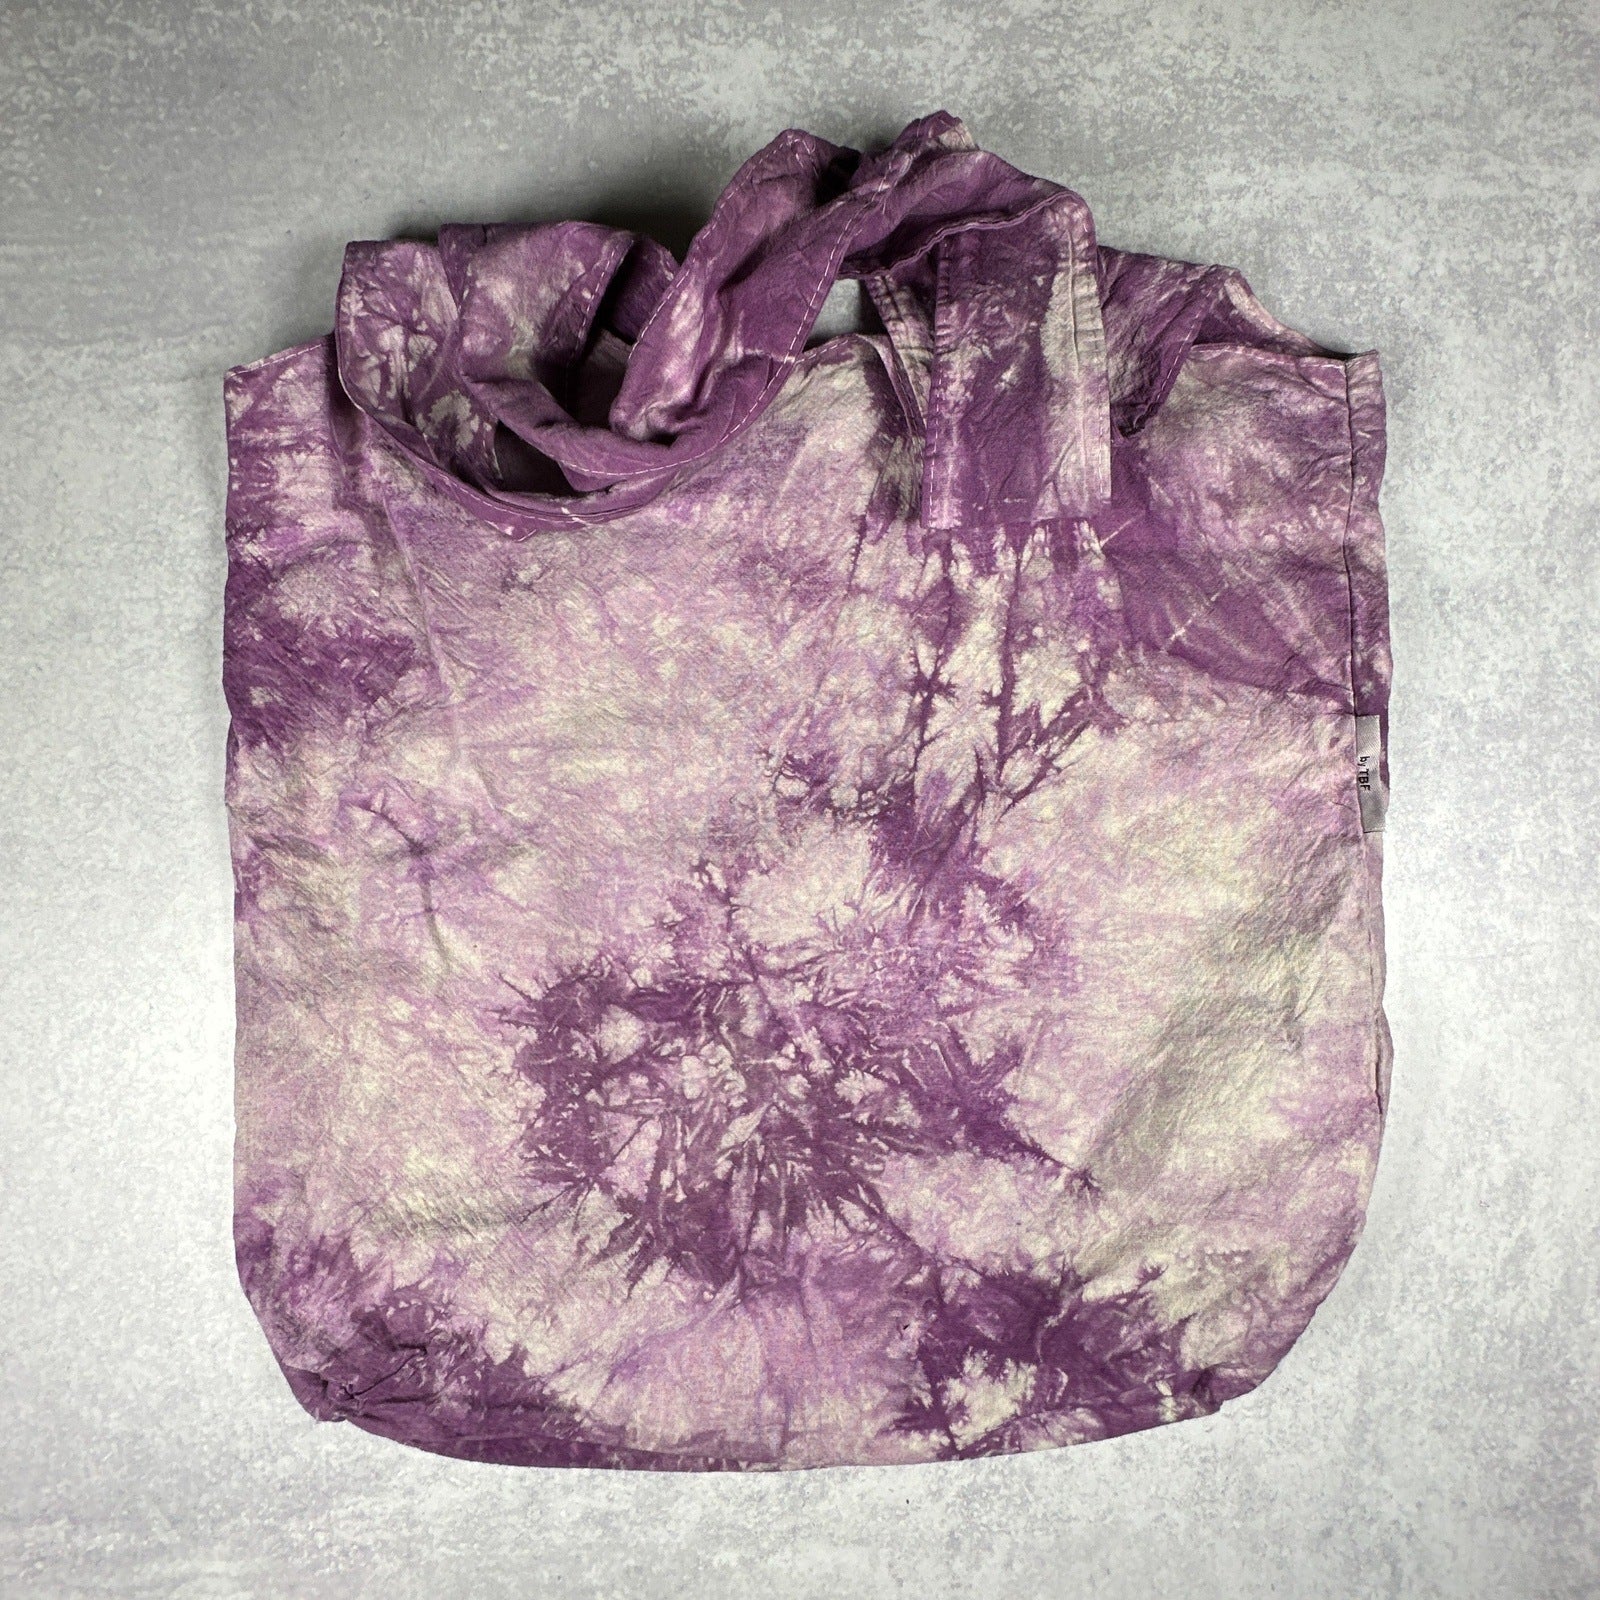 Purple Tie-dye JUMPing Spider and Mushroom Tote Bag - The Serpentry